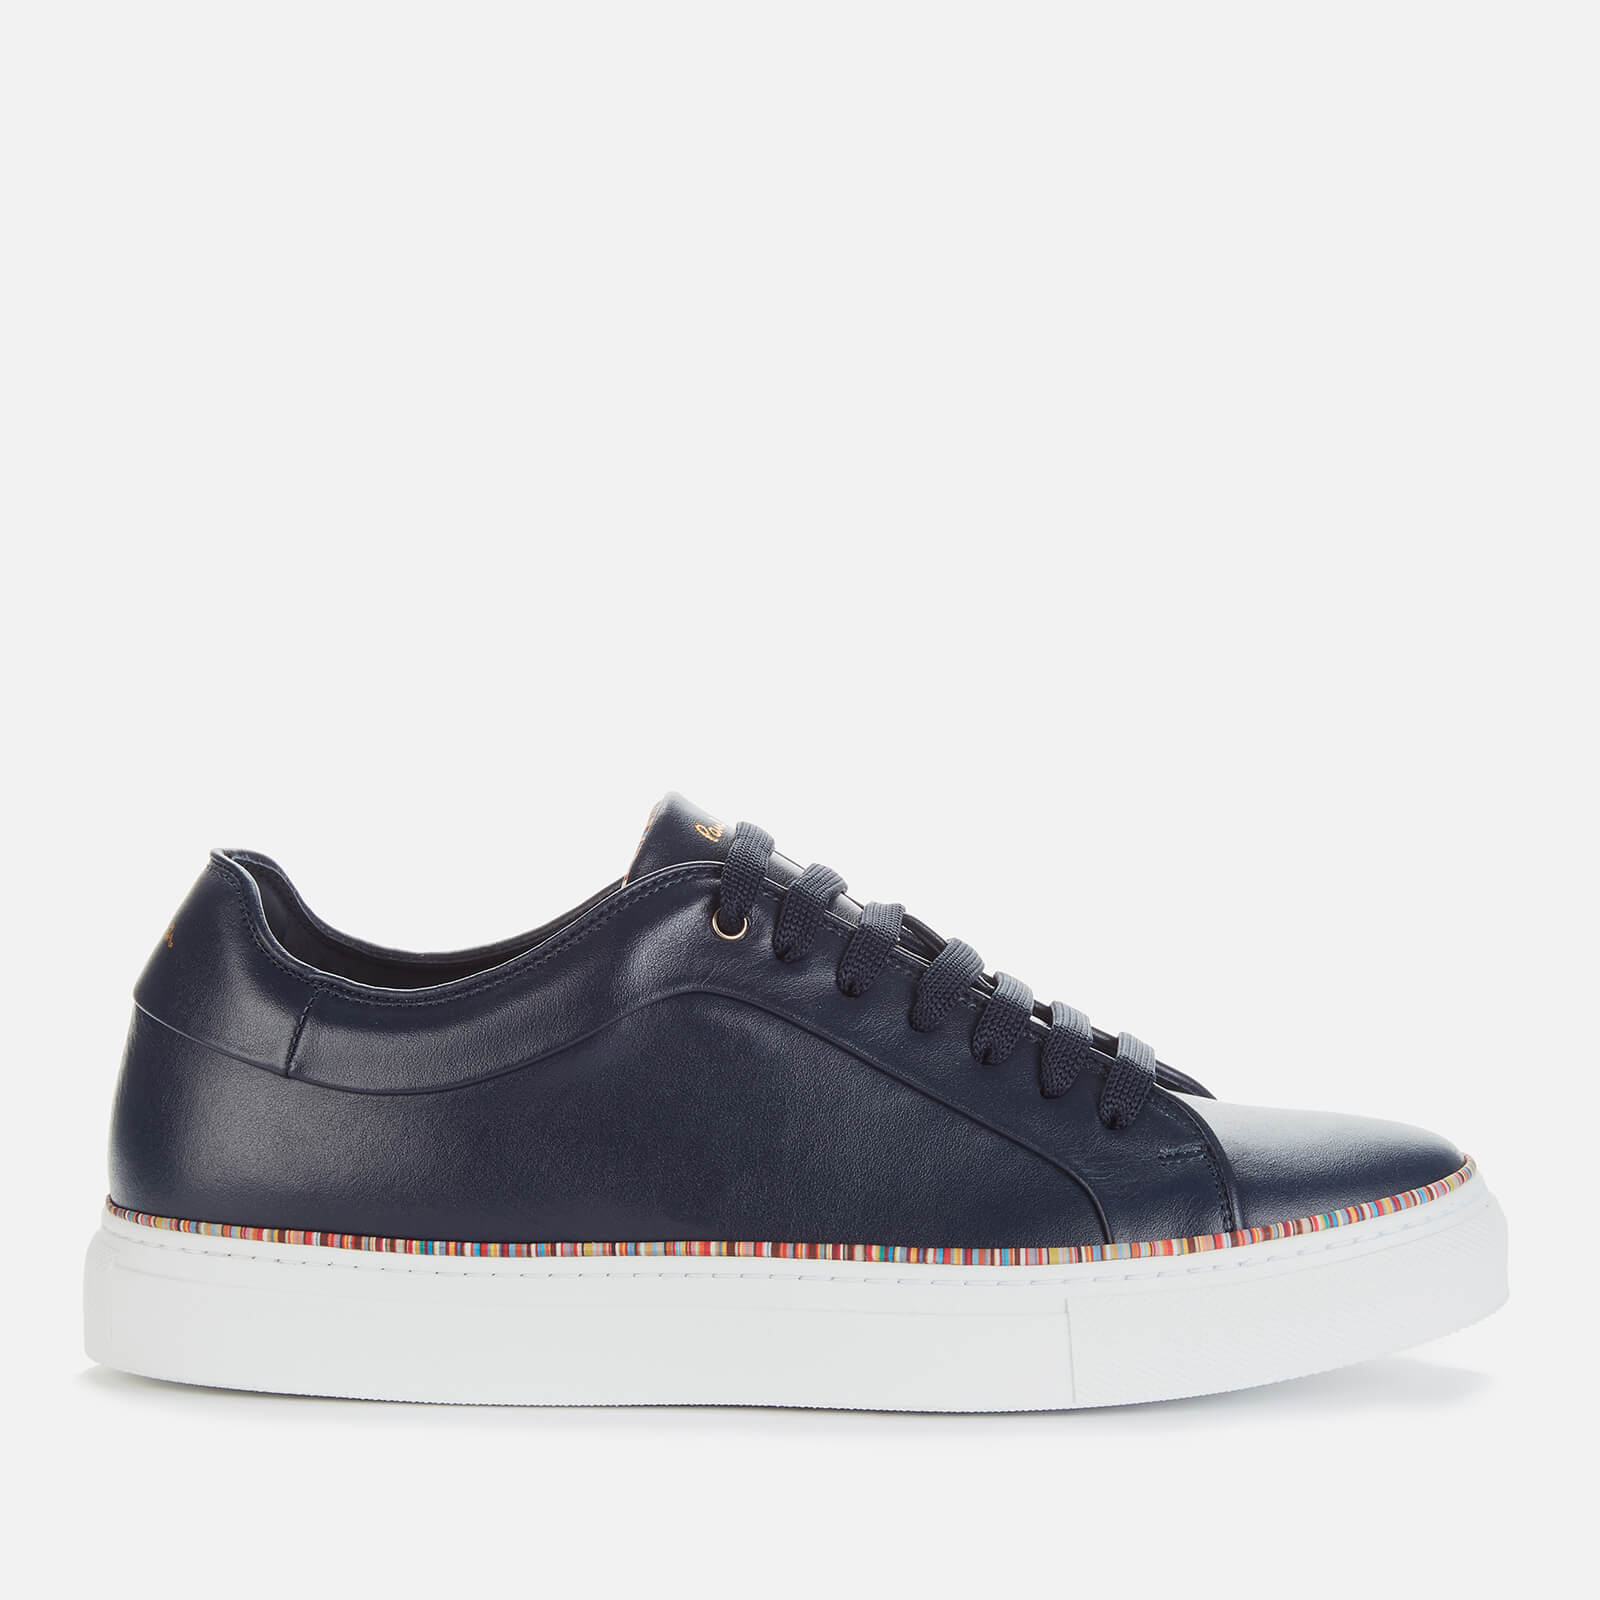 Paul Smith Men's Basso Leather Cupsole Trainers - Dark Navy/Multi Piping